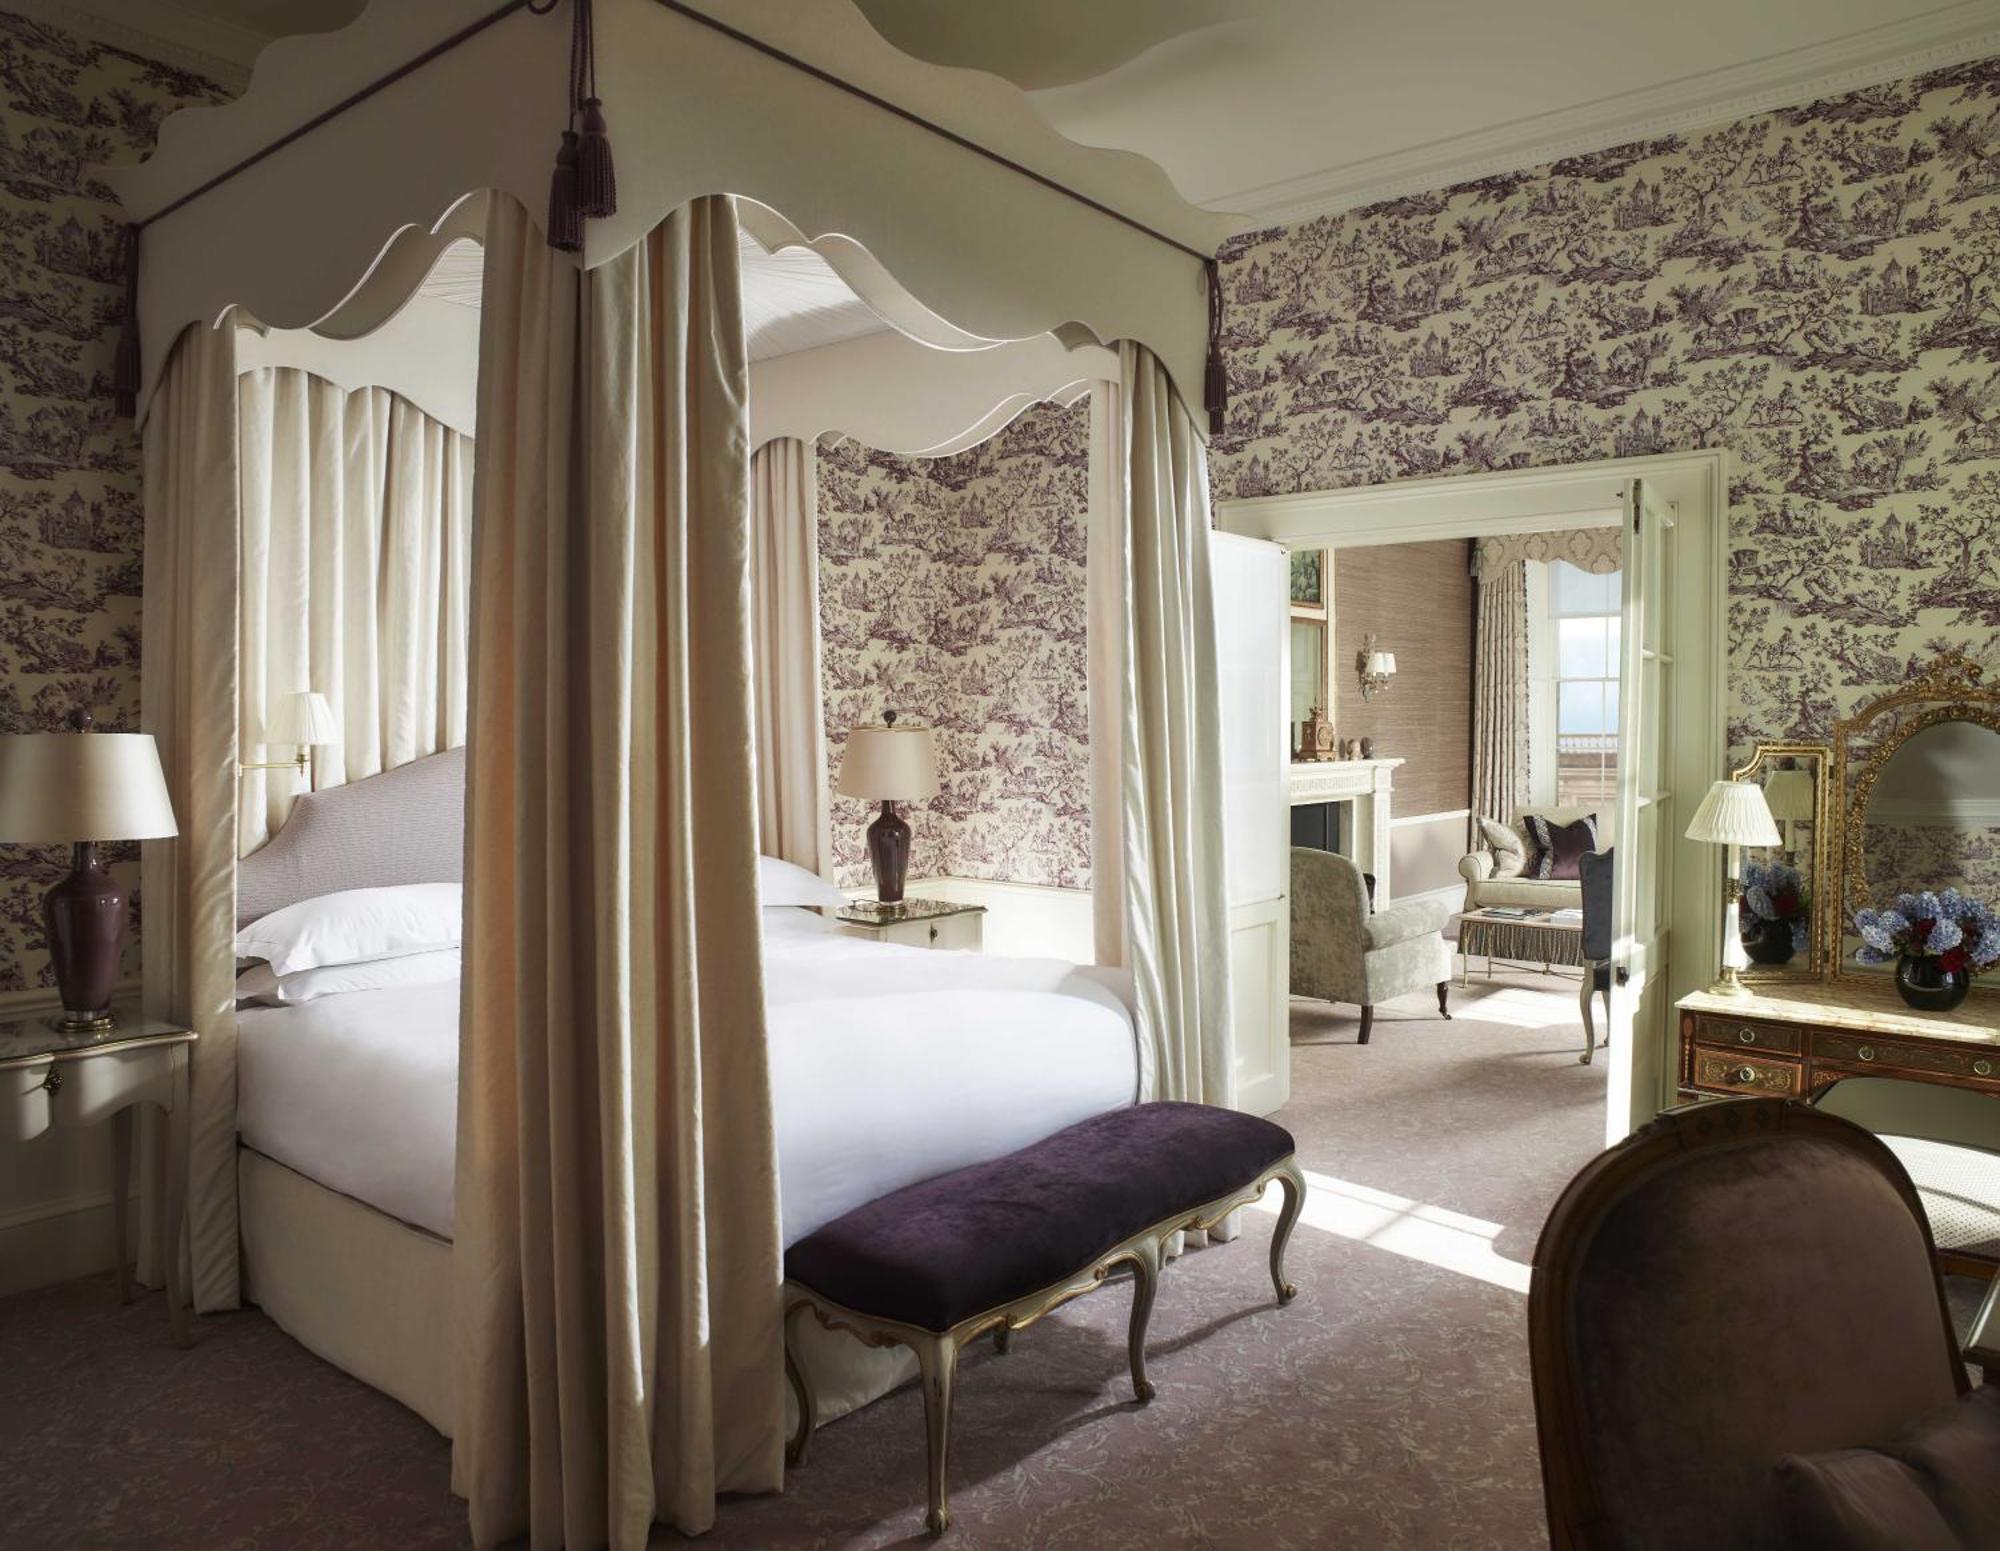 Cliveden House - An Iconic Luxury Hotel Maidenhead Room photo